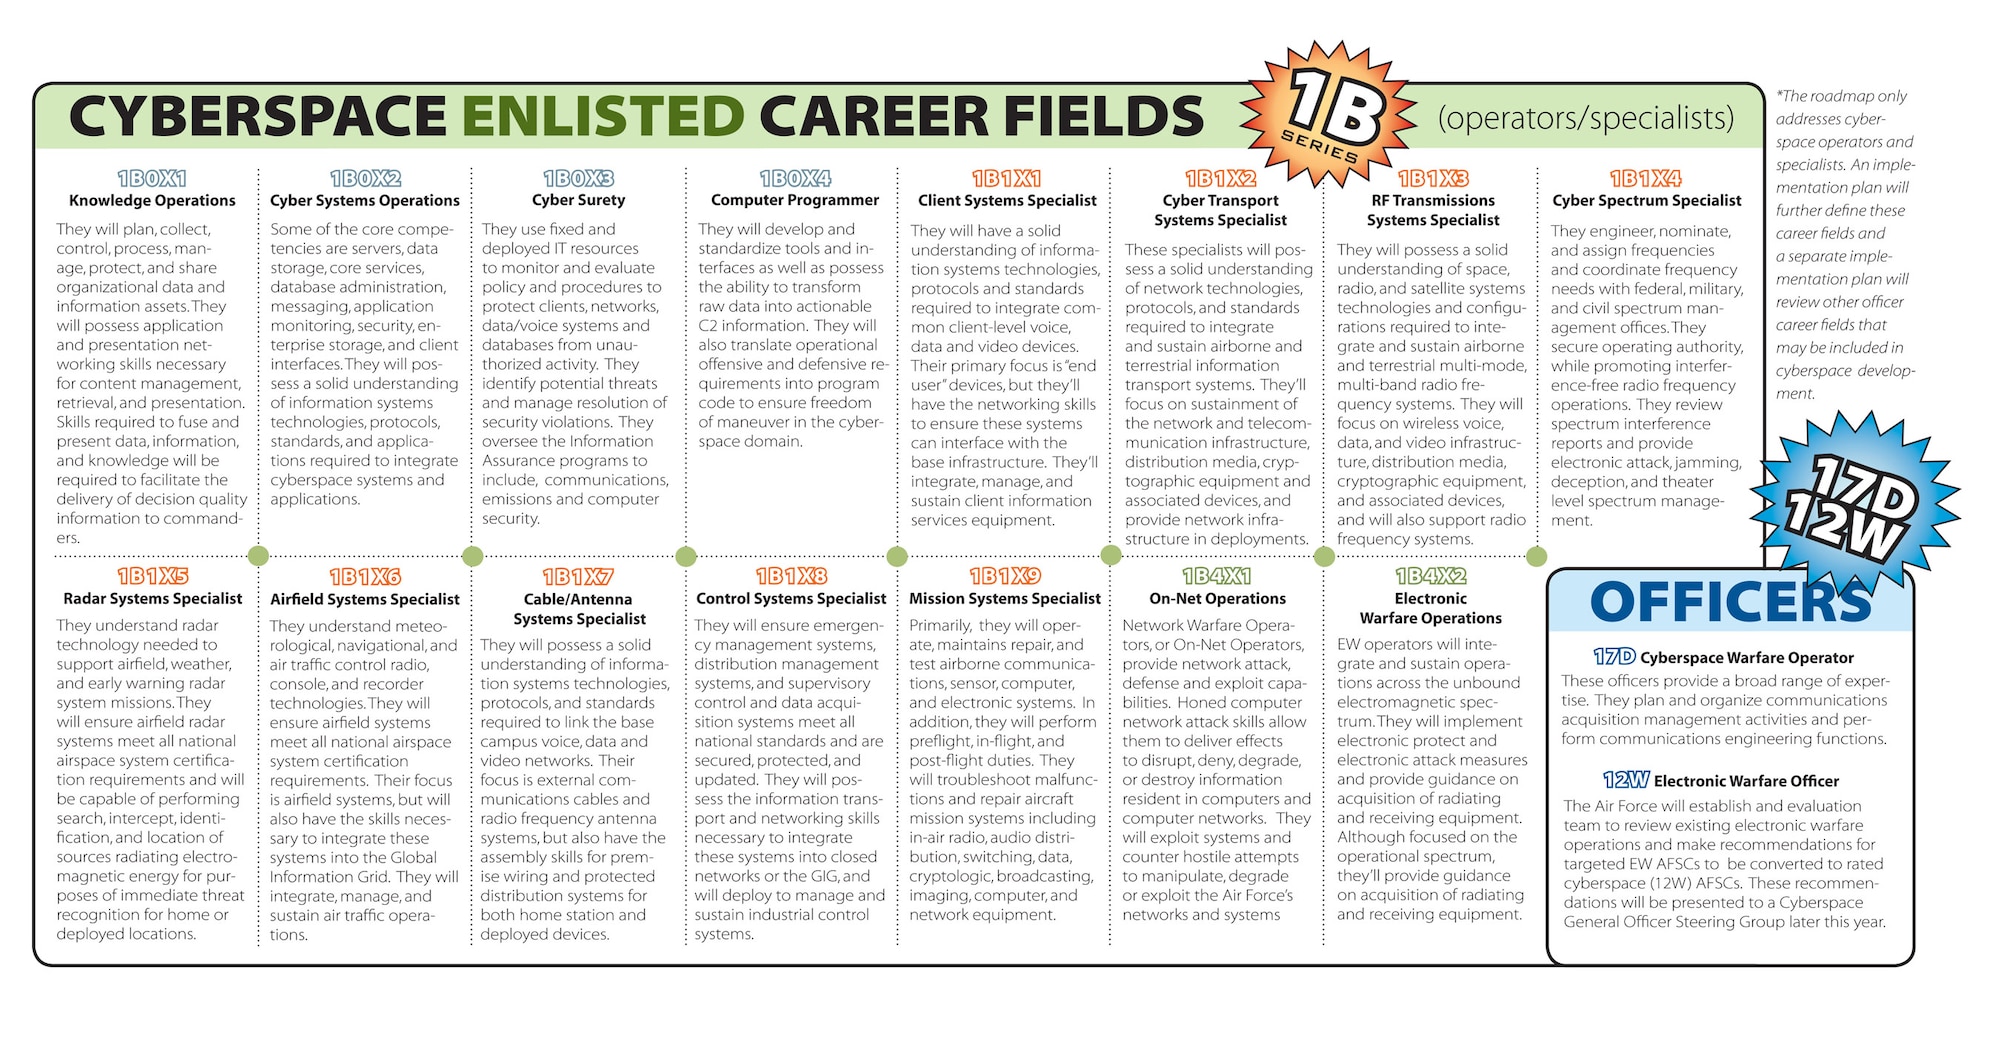 This illustration shows the proposed 15 new cyberspace enlisted career fields along with the officer specialties.